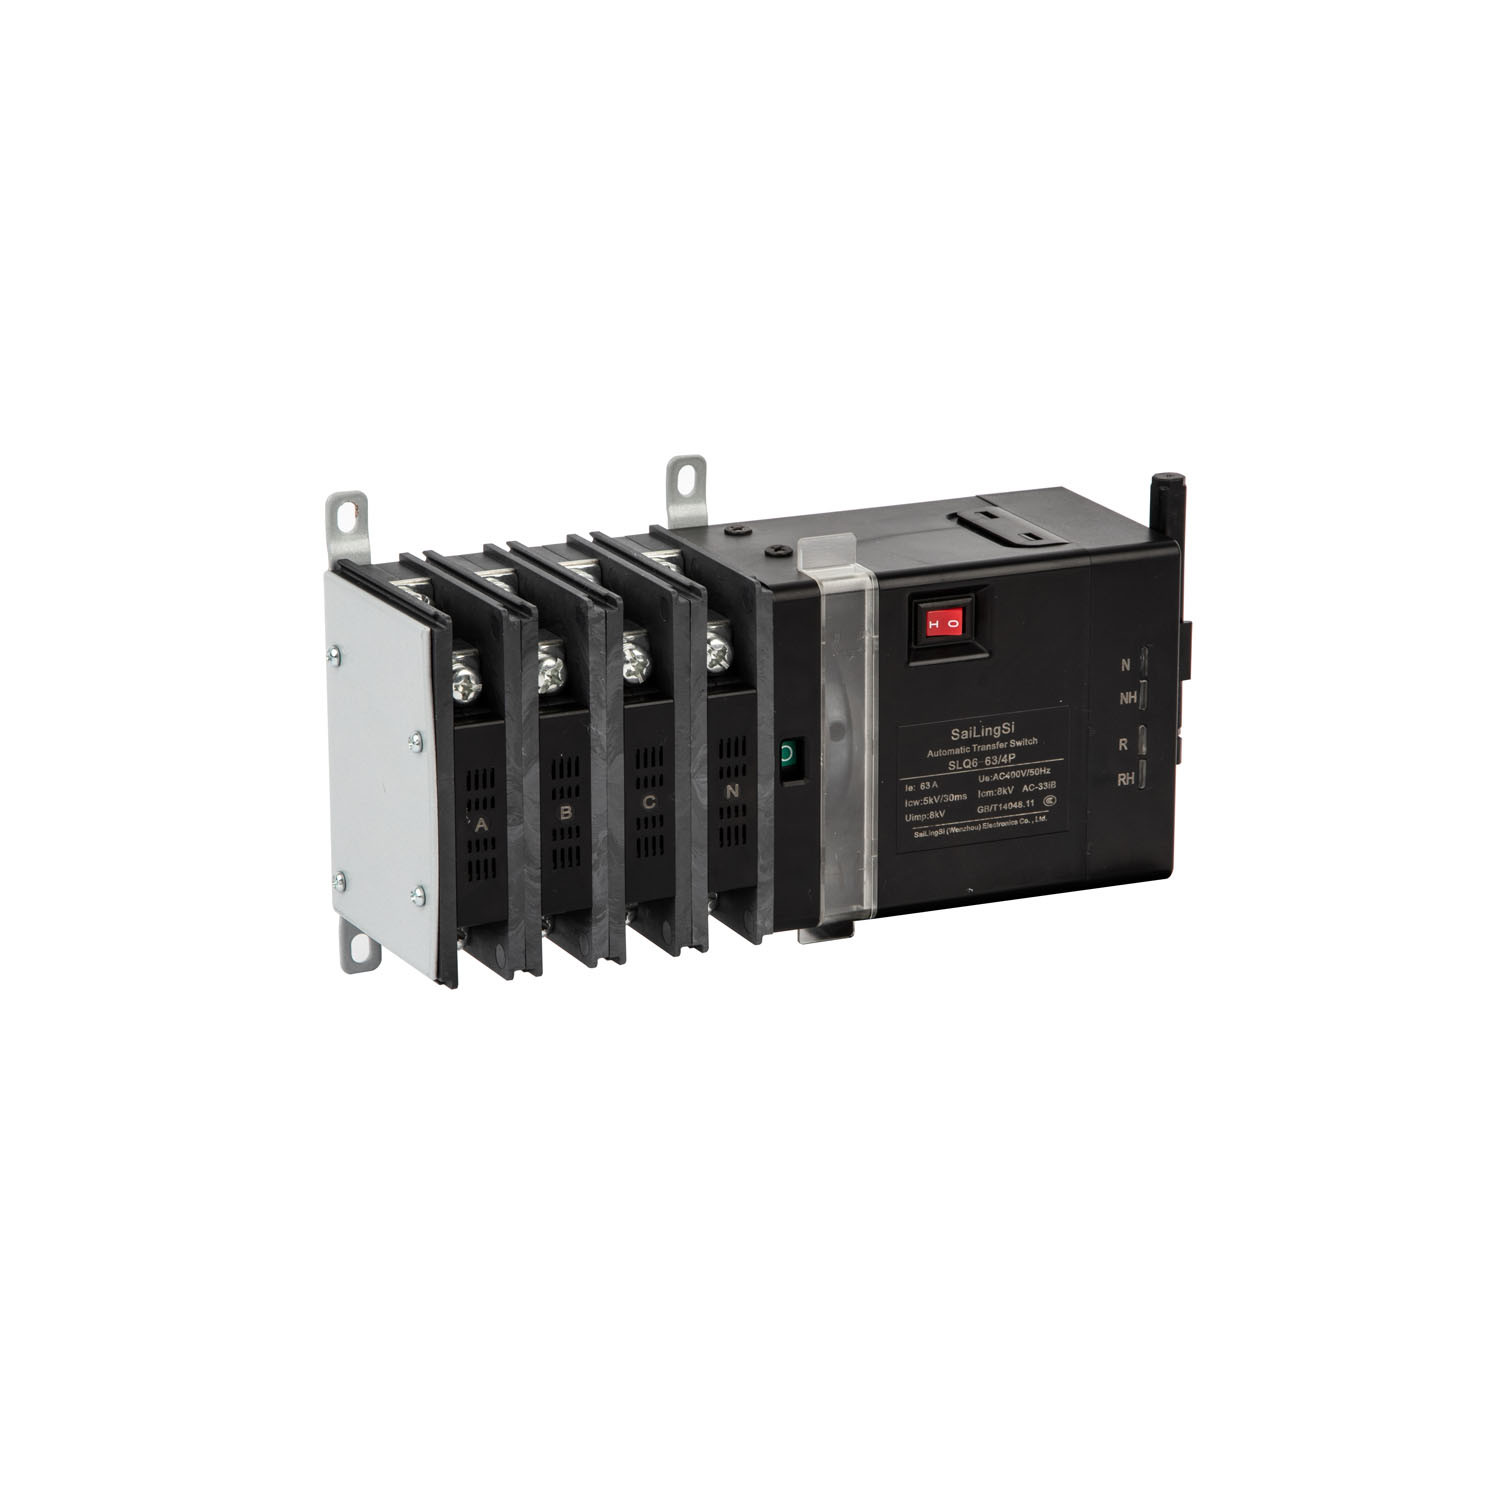 Solar Power to City Power ATS 125A 3p Automatic Transfer Switch ATS with Fire Control